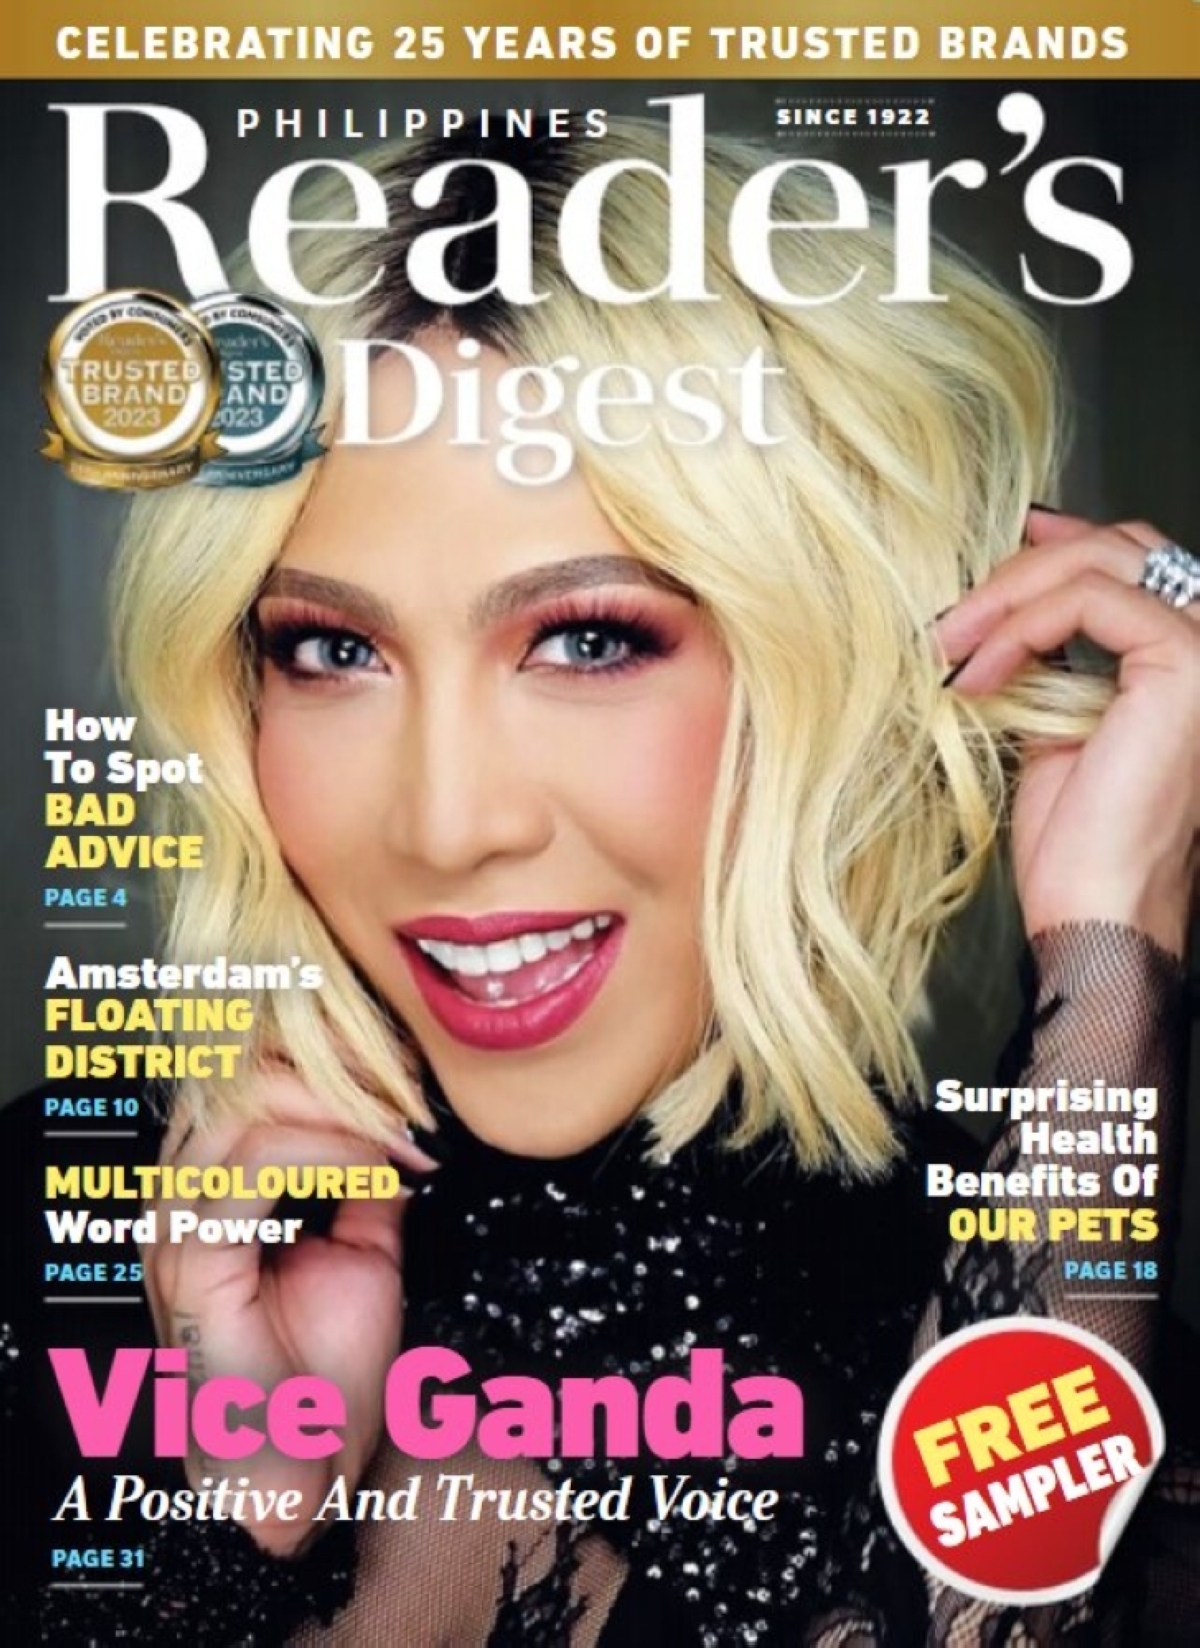 Vice Ganda on the cover of 'Reader's Digest again